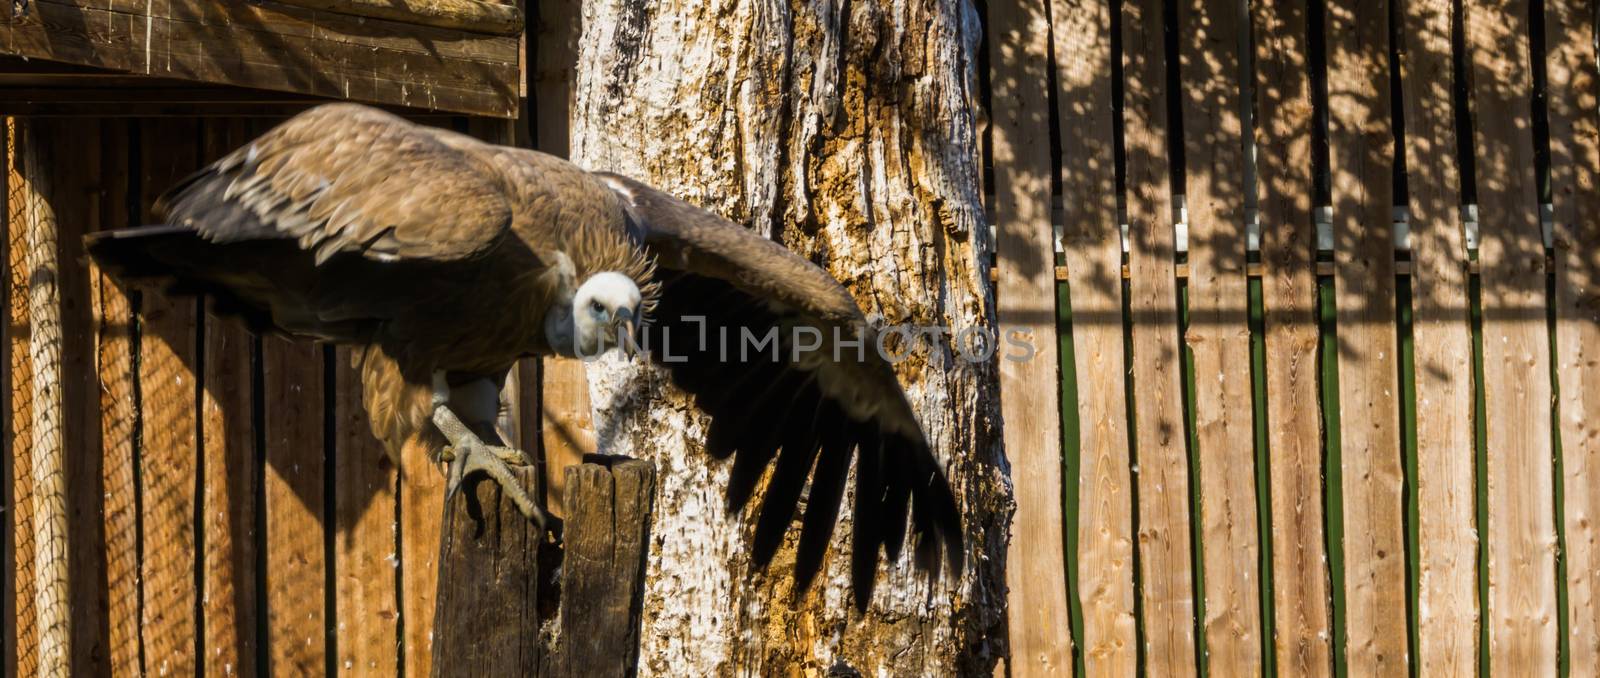 griffon vulture standing in a threatening pose, ready for take and spreading its wings by charlottebleijenberg